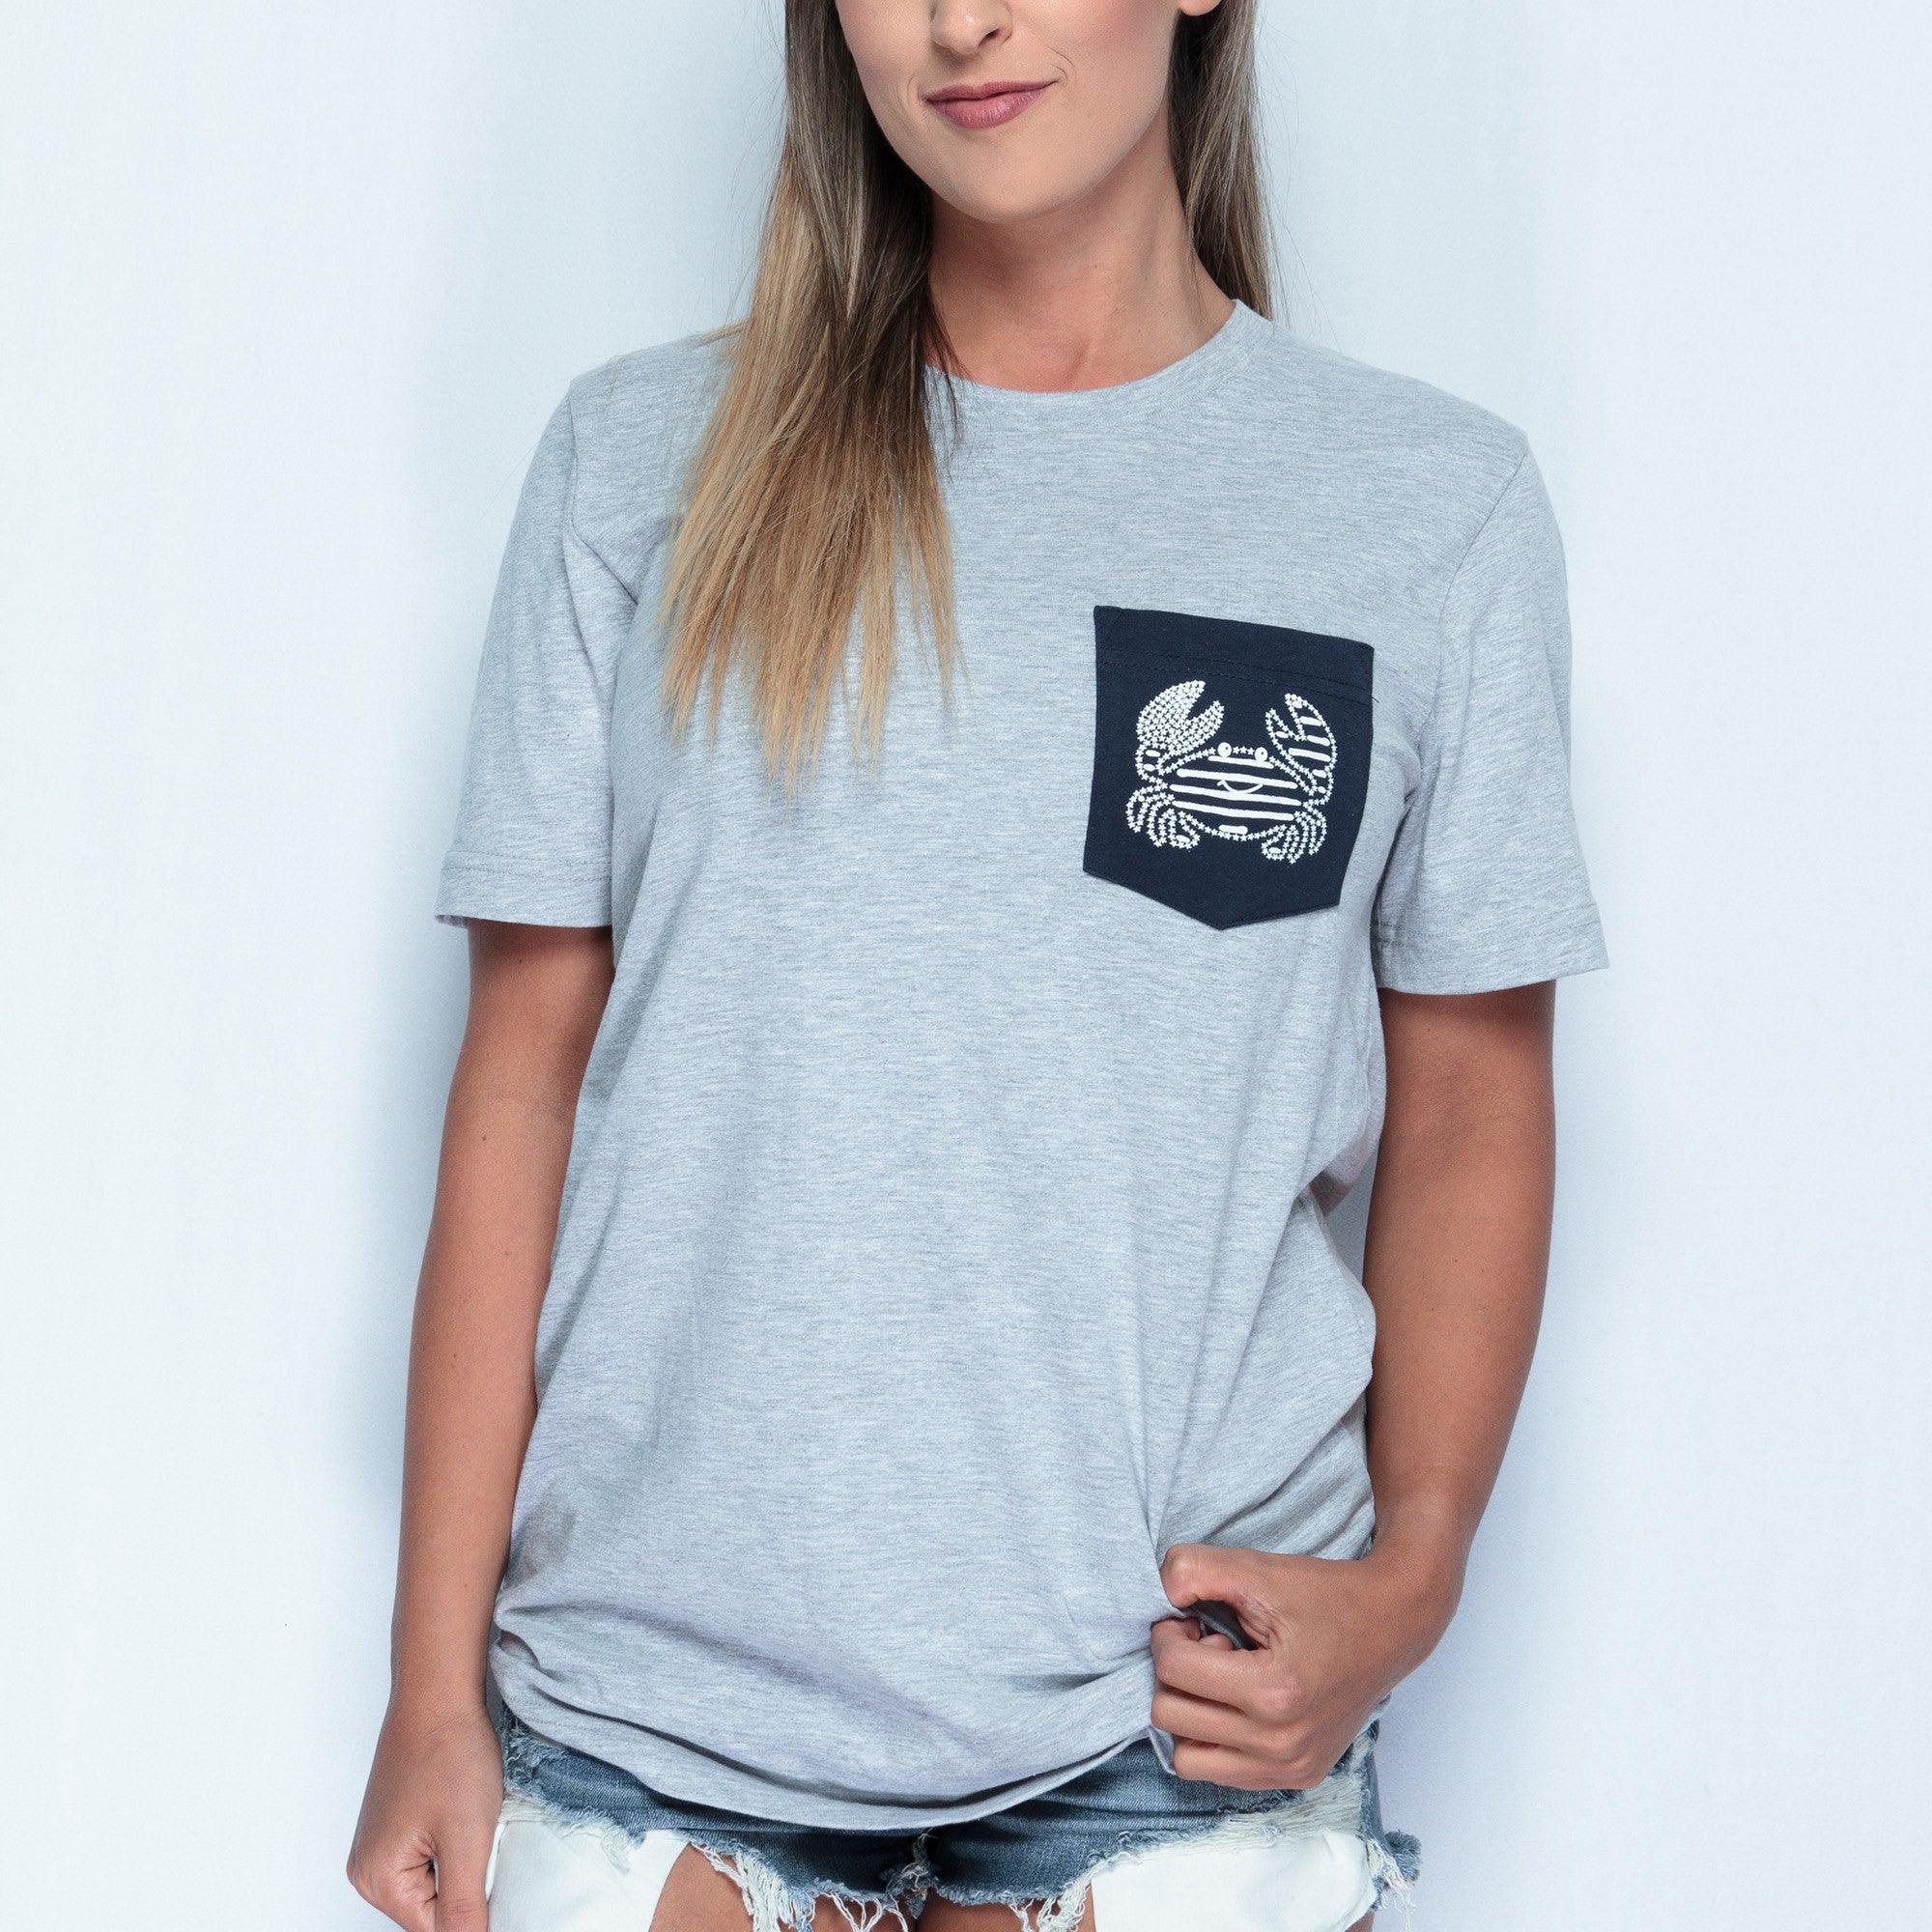 Stars & Stripes Crab (Light Heather and Navy) / Pocket Shirt - Route One Apparel